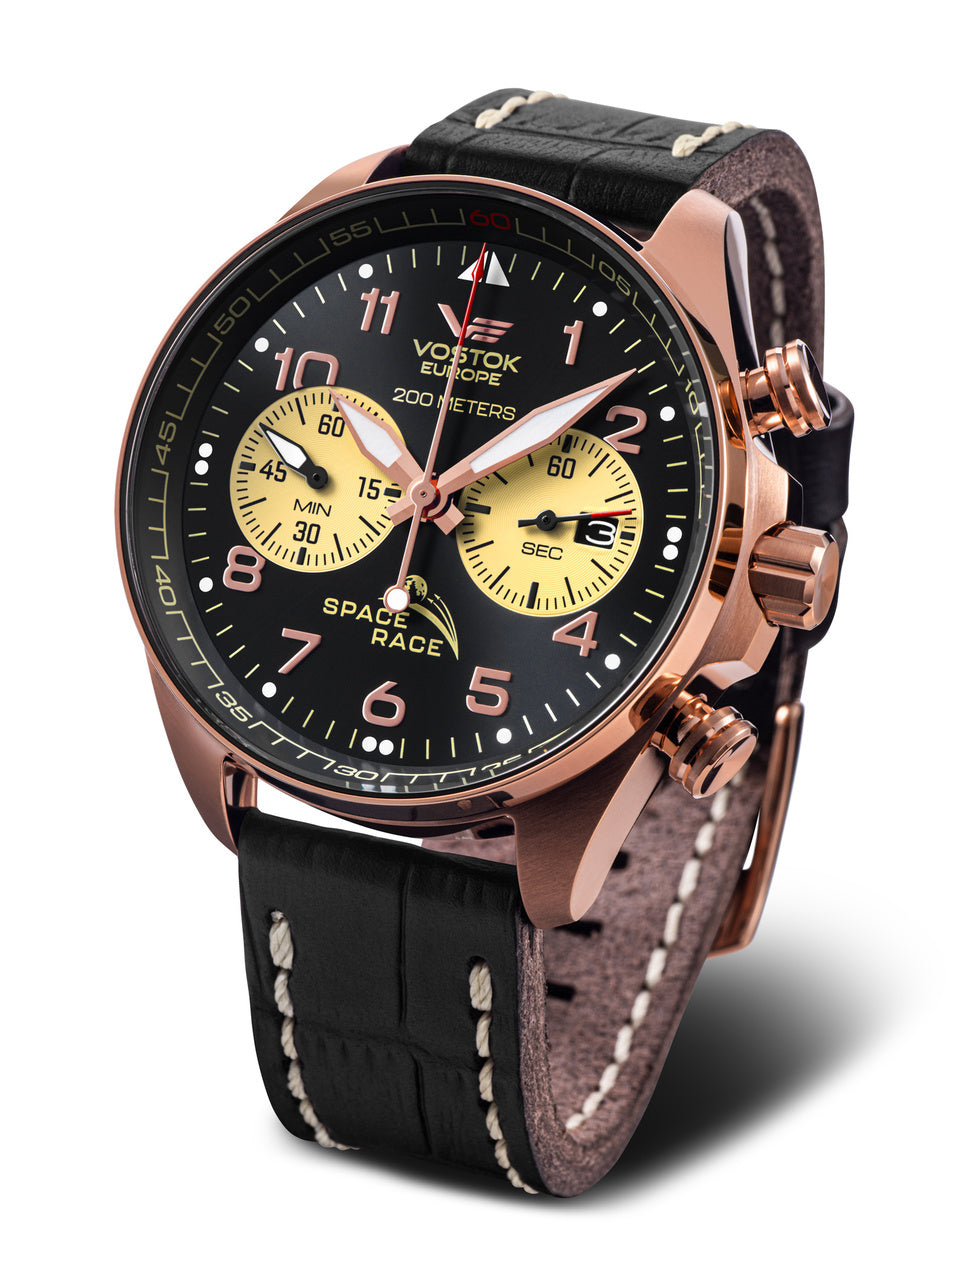 Vostok-Europe Space Race Chronograph Watch on Leather 6S21/325B668